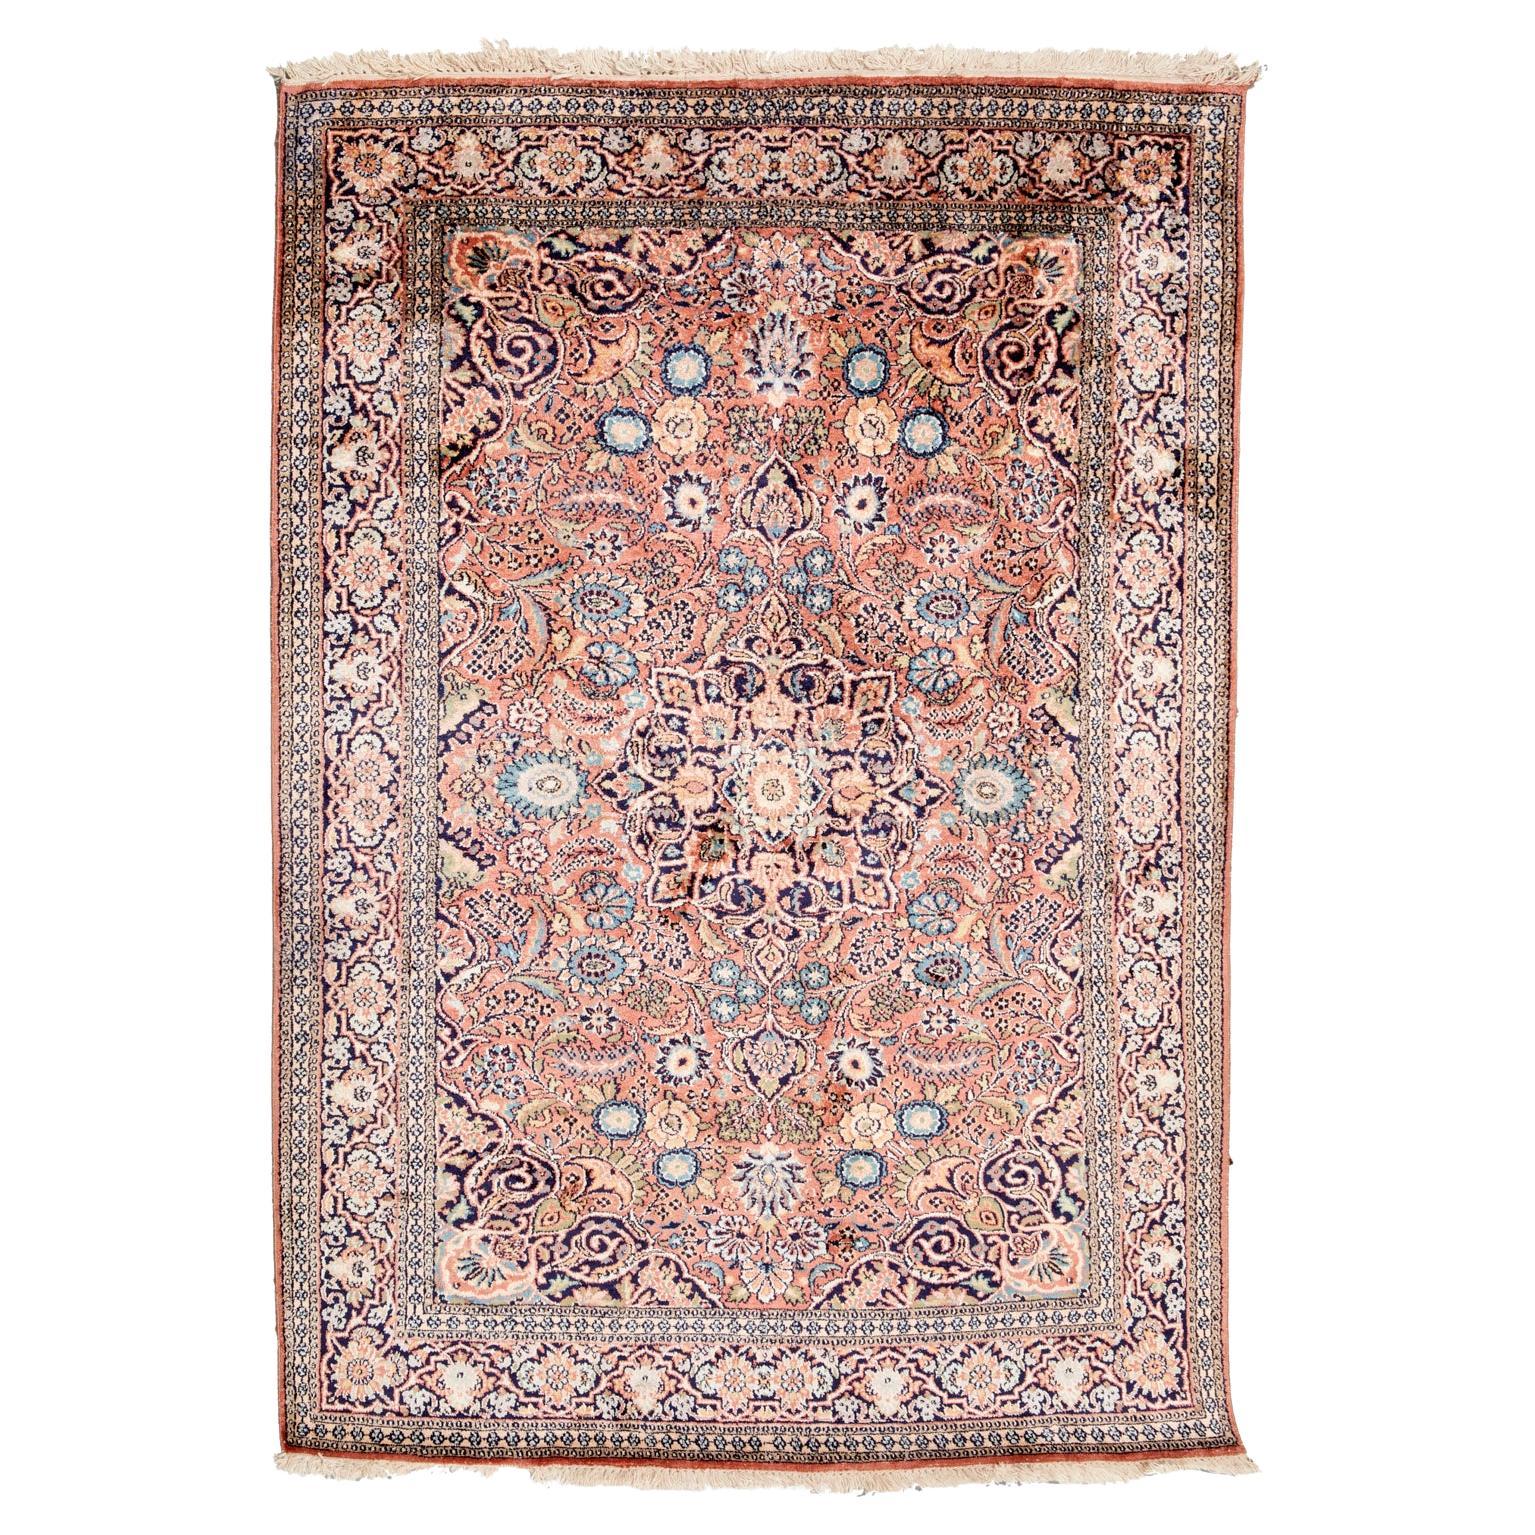 Vintage Silk Pile Kashmir Rug with Floral Designs on a Salmon Pink Ground For Sale